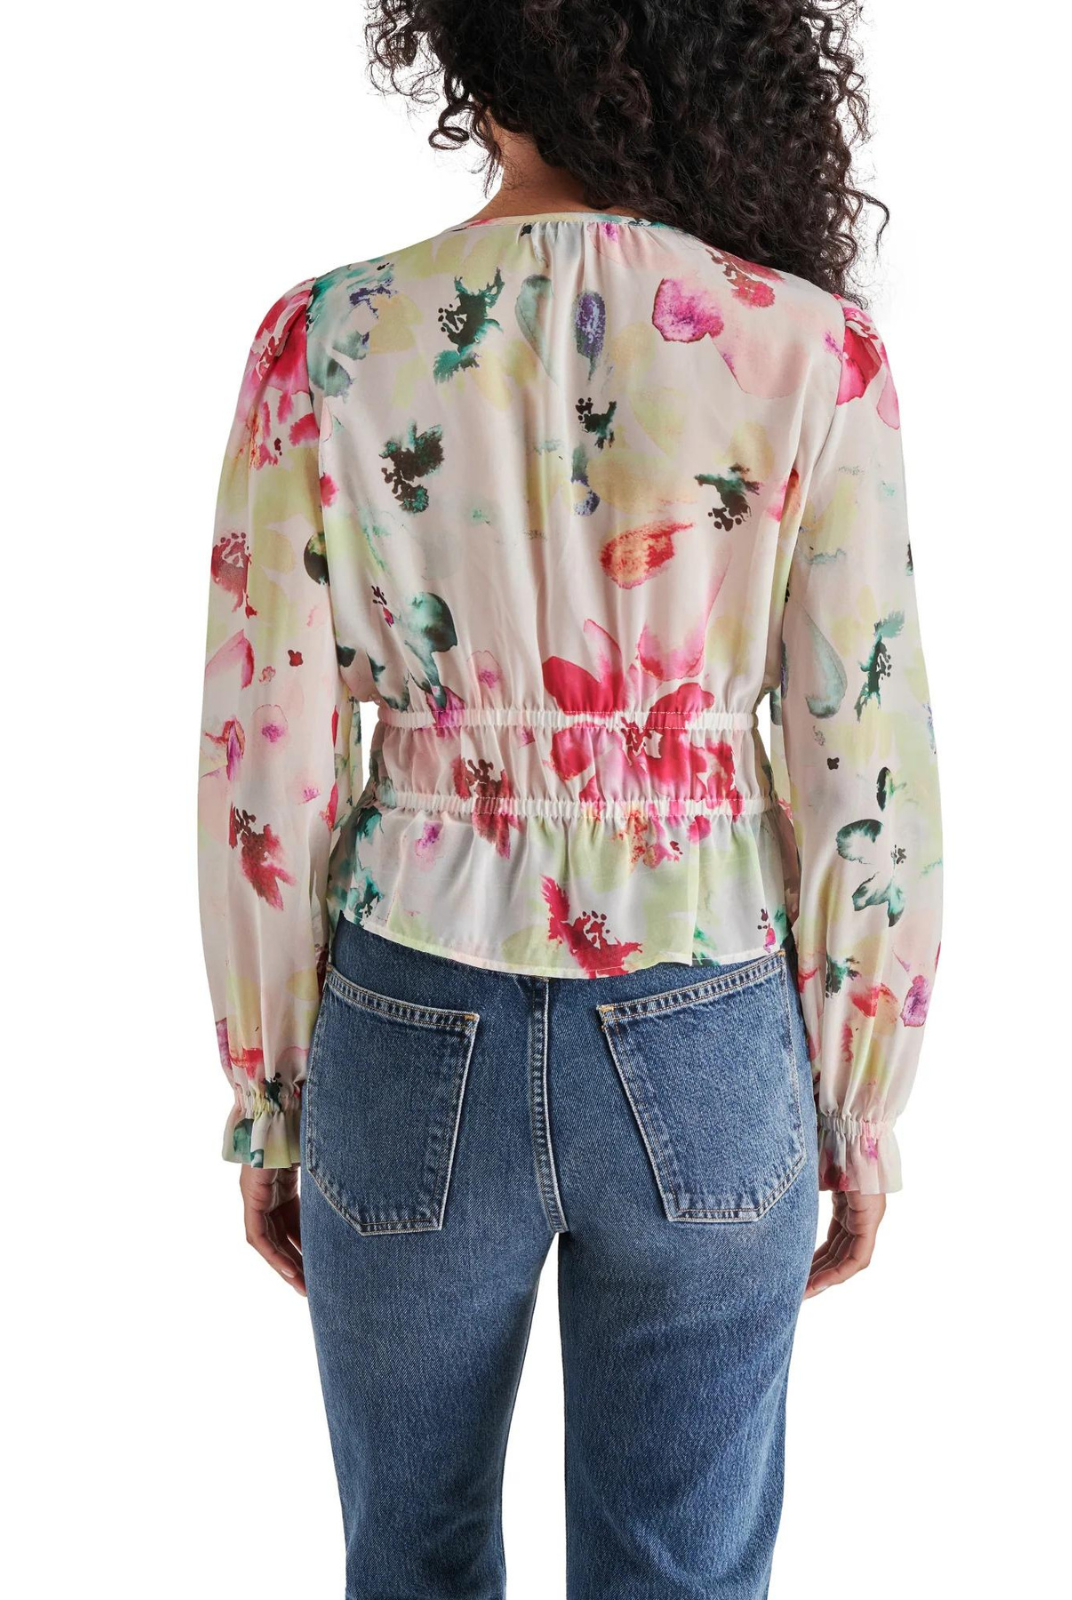 Steve Madden Ardenne Top Elastic at the waist creates gorgeous shape on this blousy woven covered in a watercolor-inspired floral print and framed by billowy long sleeves.